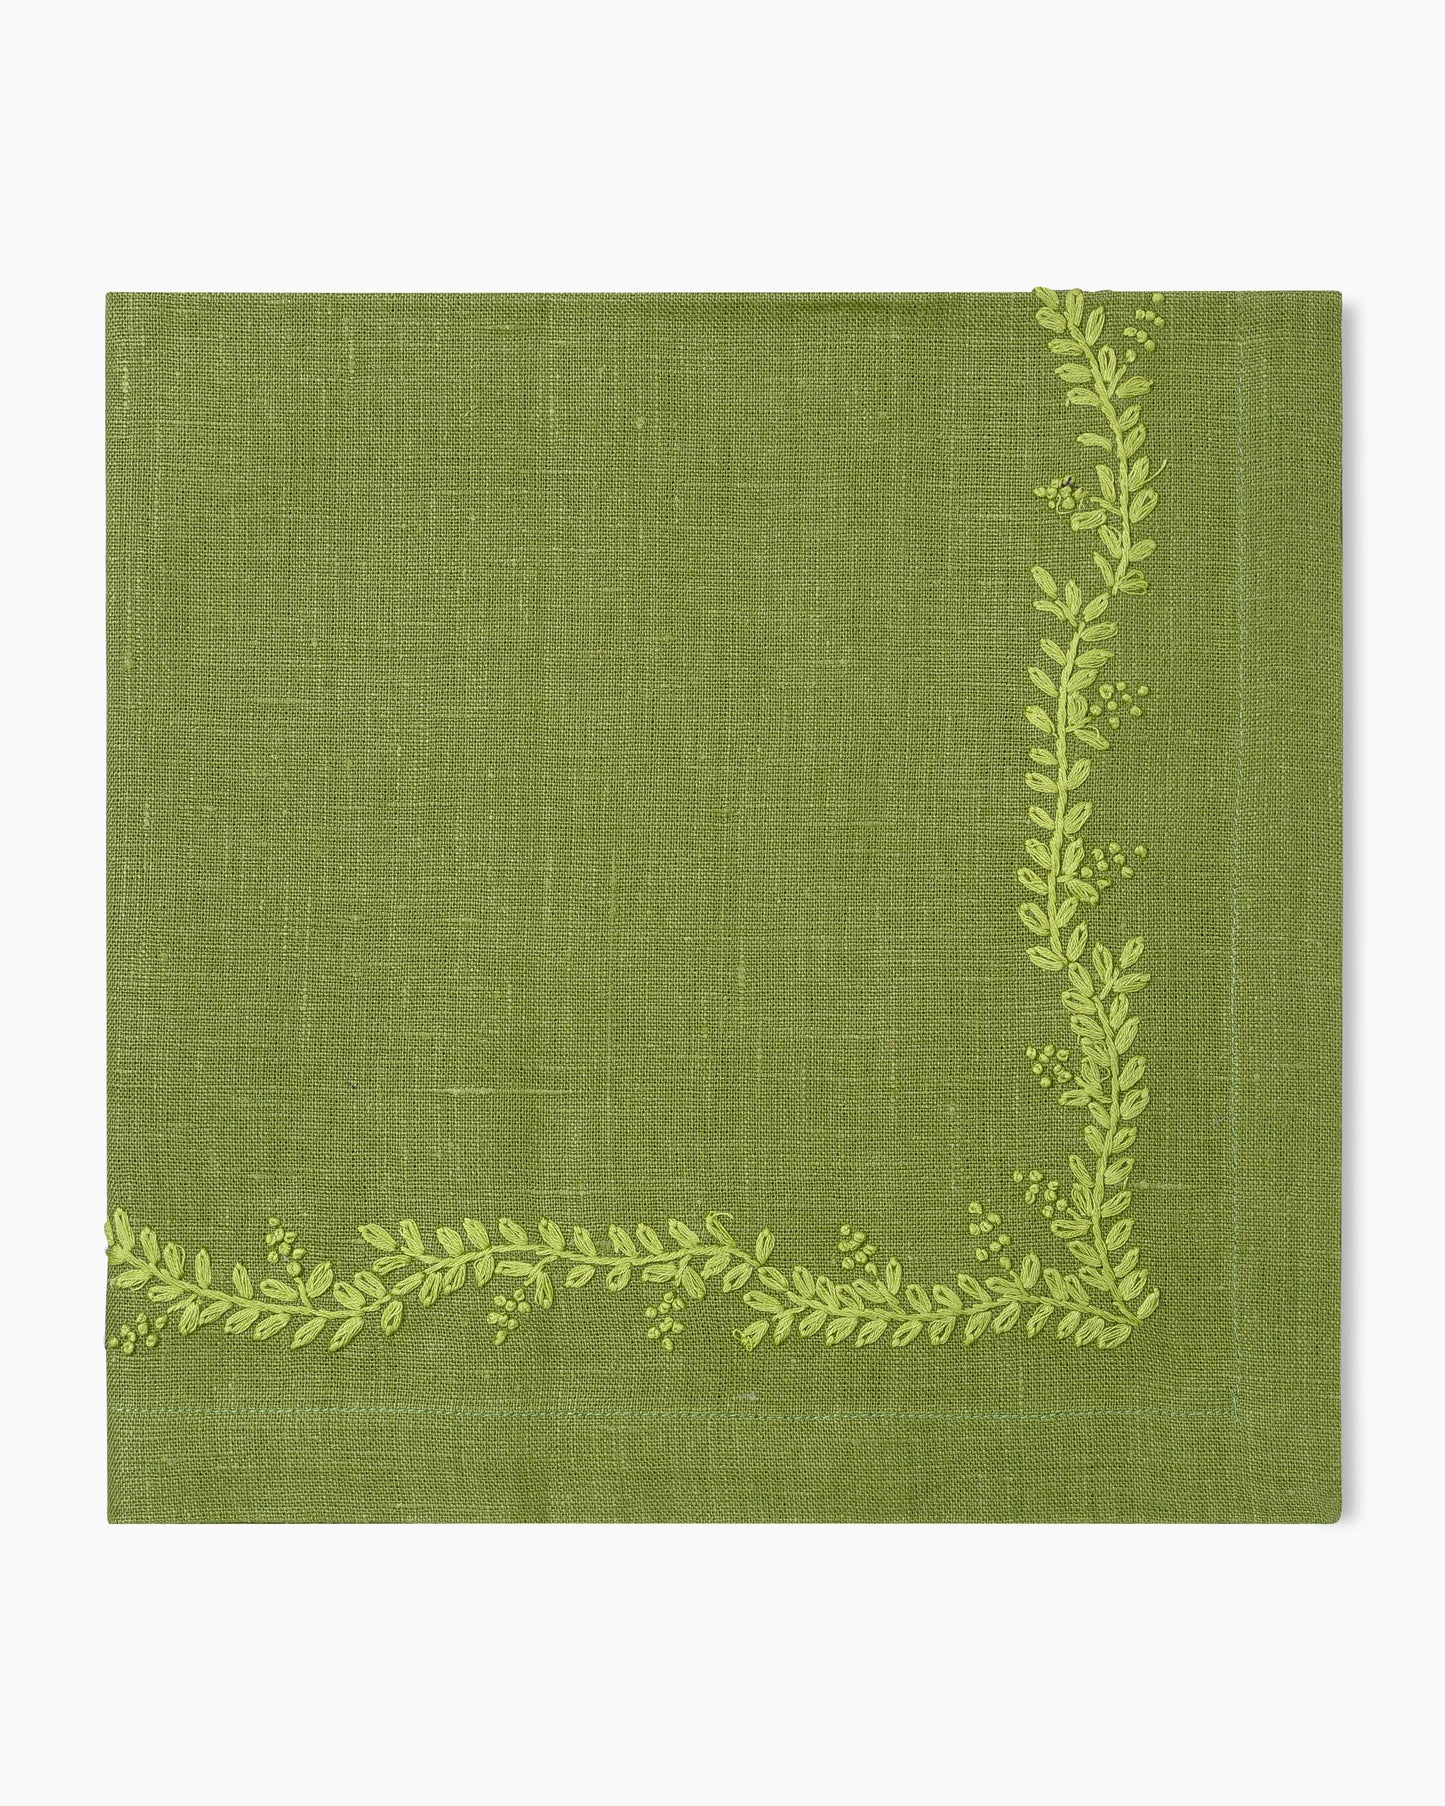 A Henry Handwork Prism Vine Linen Dinner Napkin in 13 colors featuring green leaves.